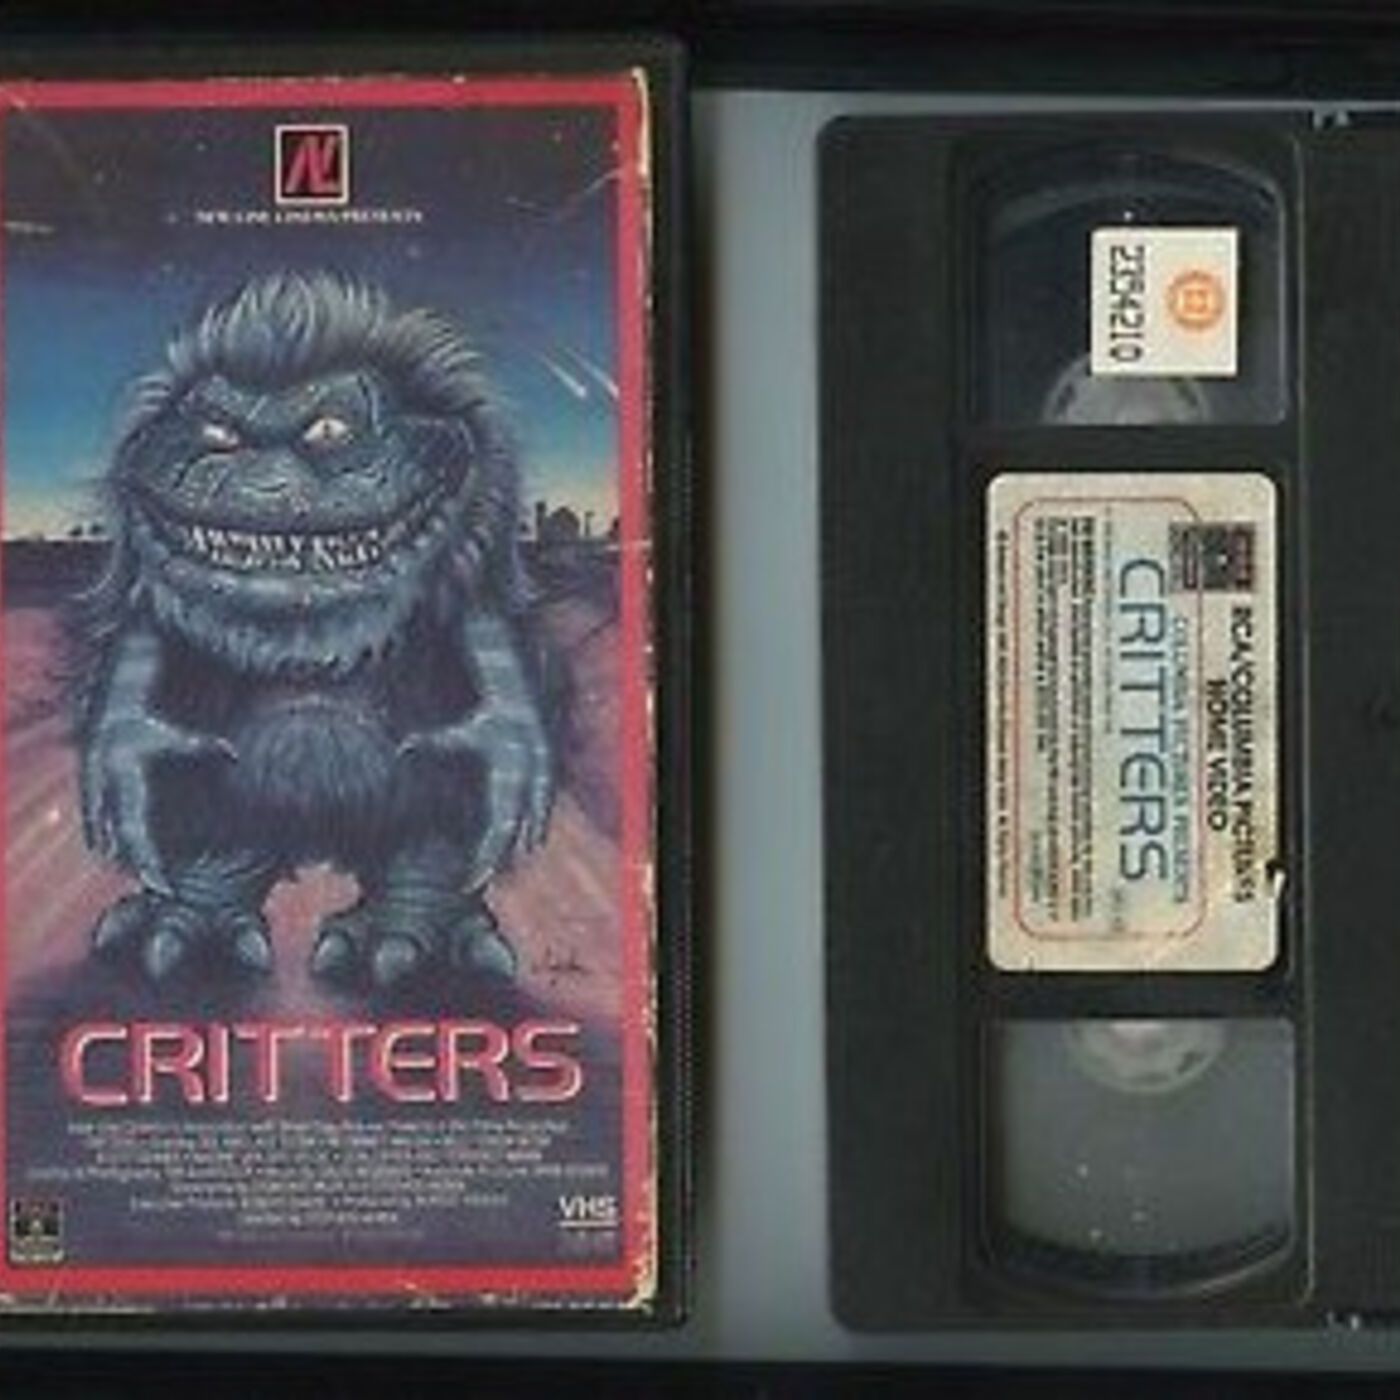 1986 - Critters Image